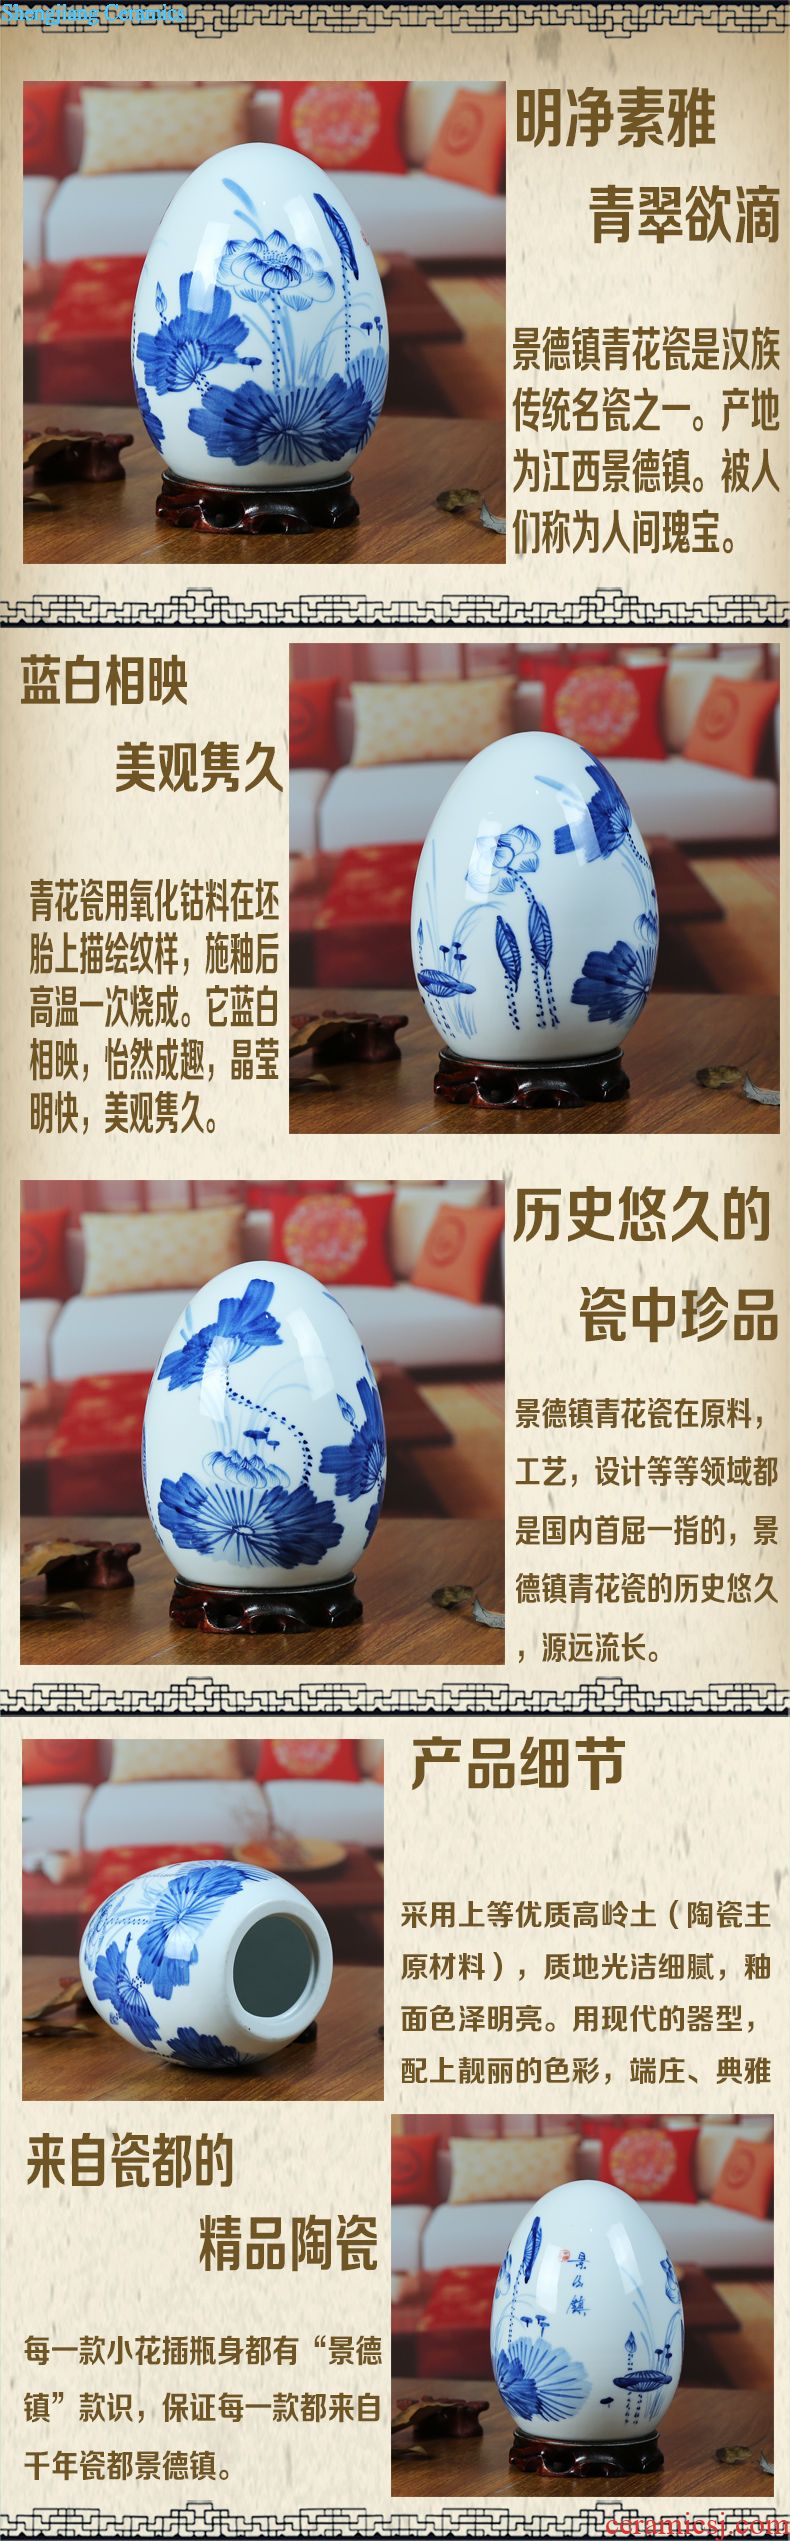 Open the slice of jingdezhen ceramics plain tricolour vase modern home sitting room adornment is contracted place decoration handicraft